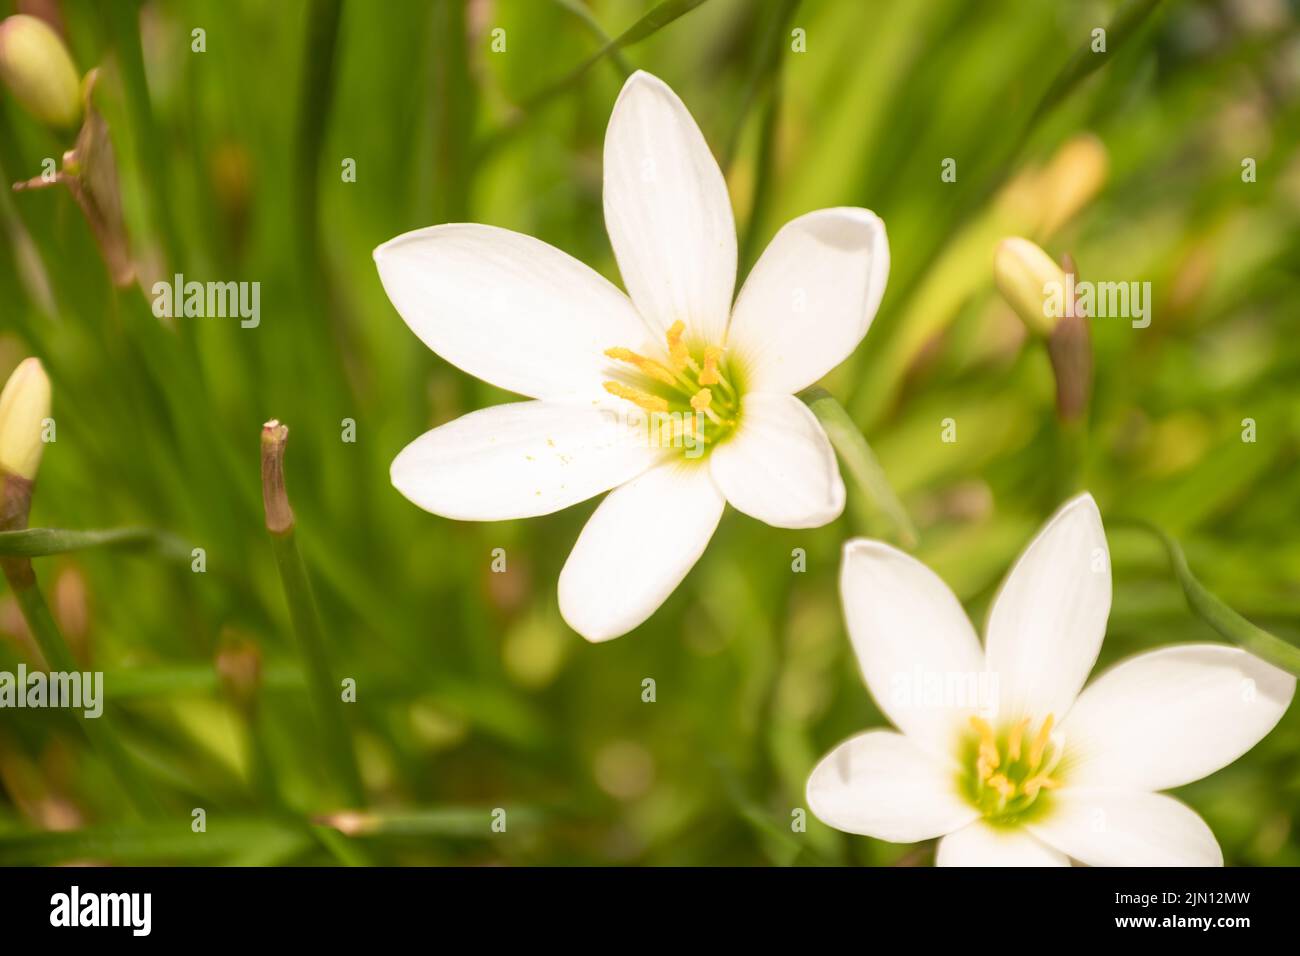 Habranthus Species, Argentine Rain Lily, Brazilian Copper lily, Fairy Lily, zephyranthes flowers are in bloom on natural daylight Stock Photo